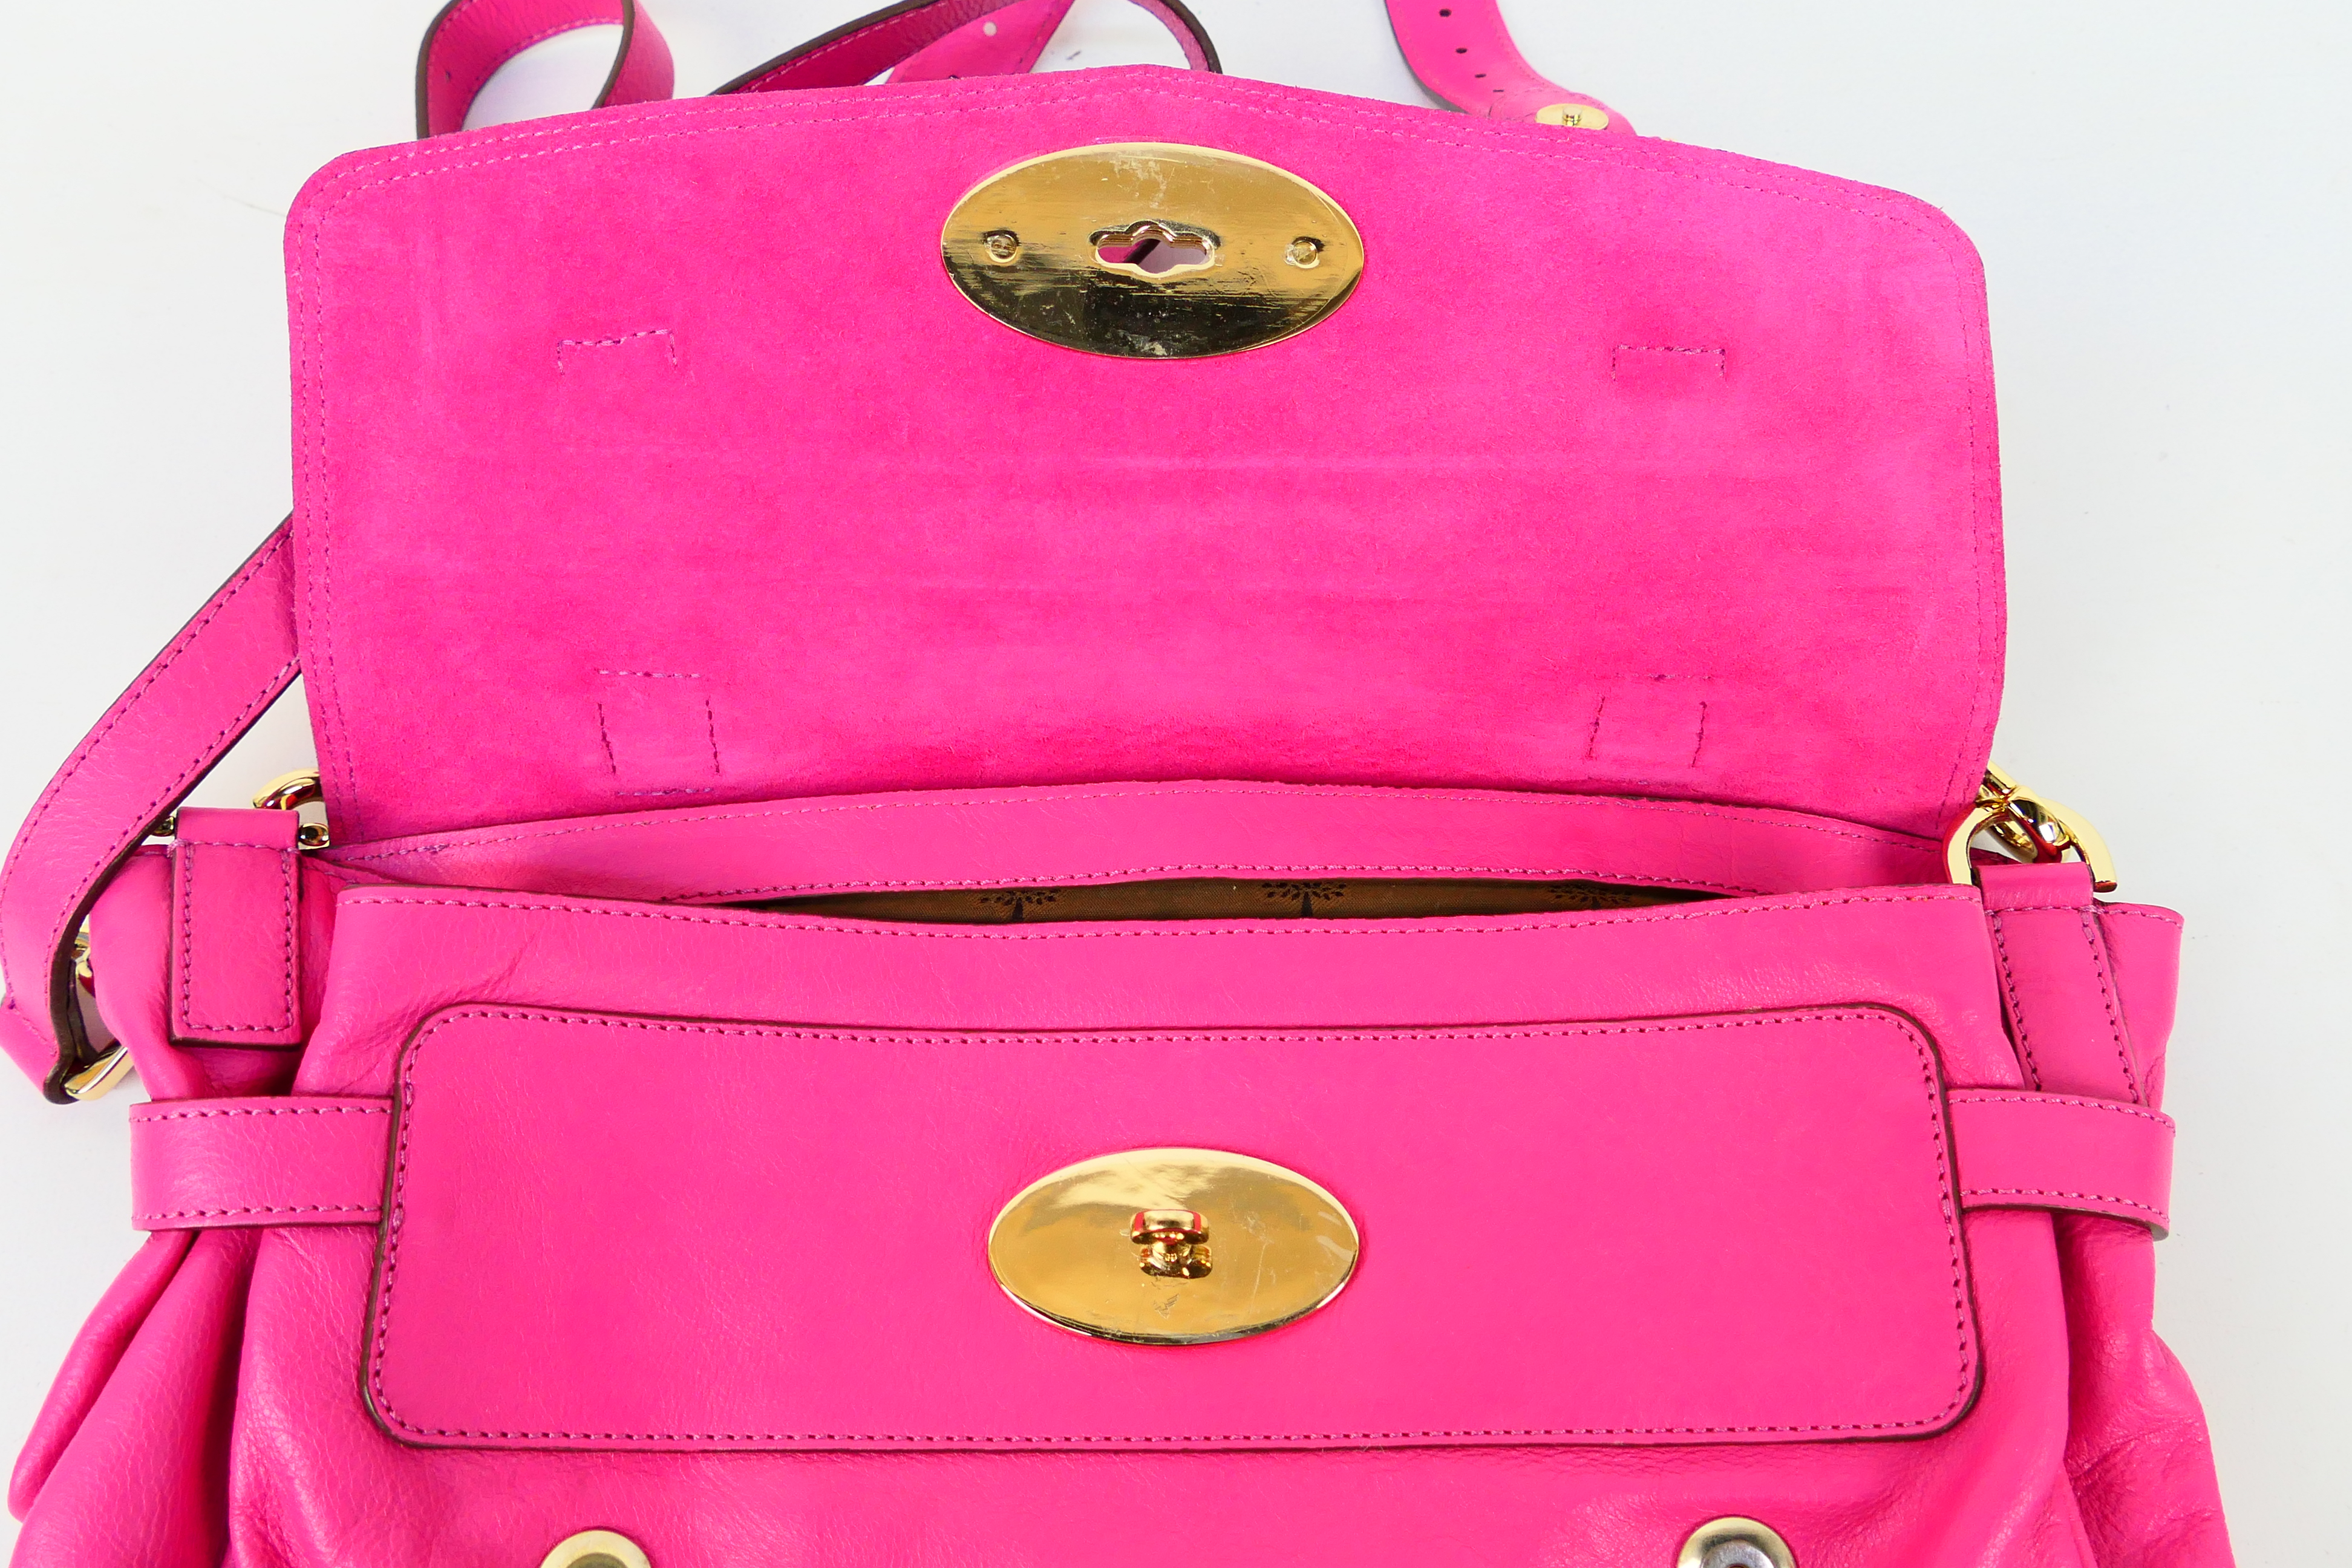 Mulberry - a Raspberry (hot pink) Mulberry handbag and shoulder strap (soft Buffalo L150), - Image 5 of 7